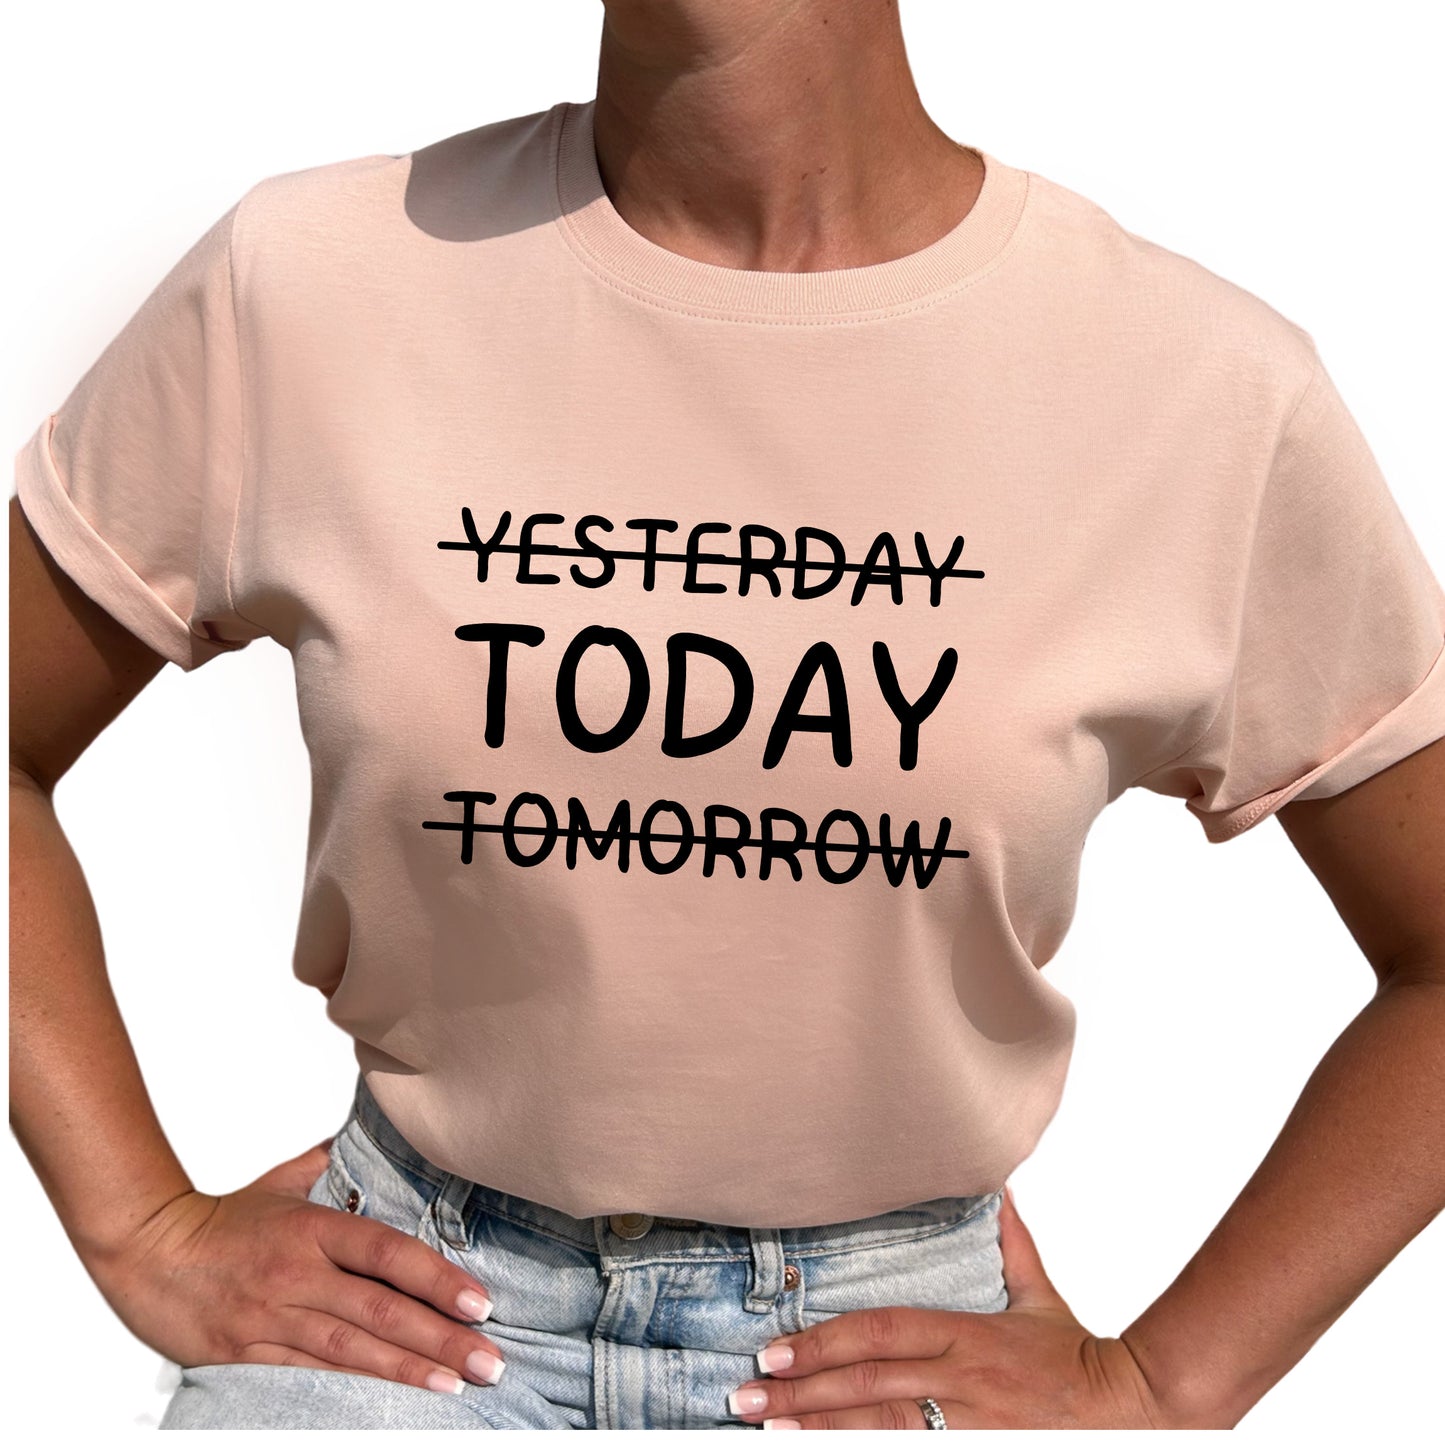 Yesterday Today Tomorrow T-shirt